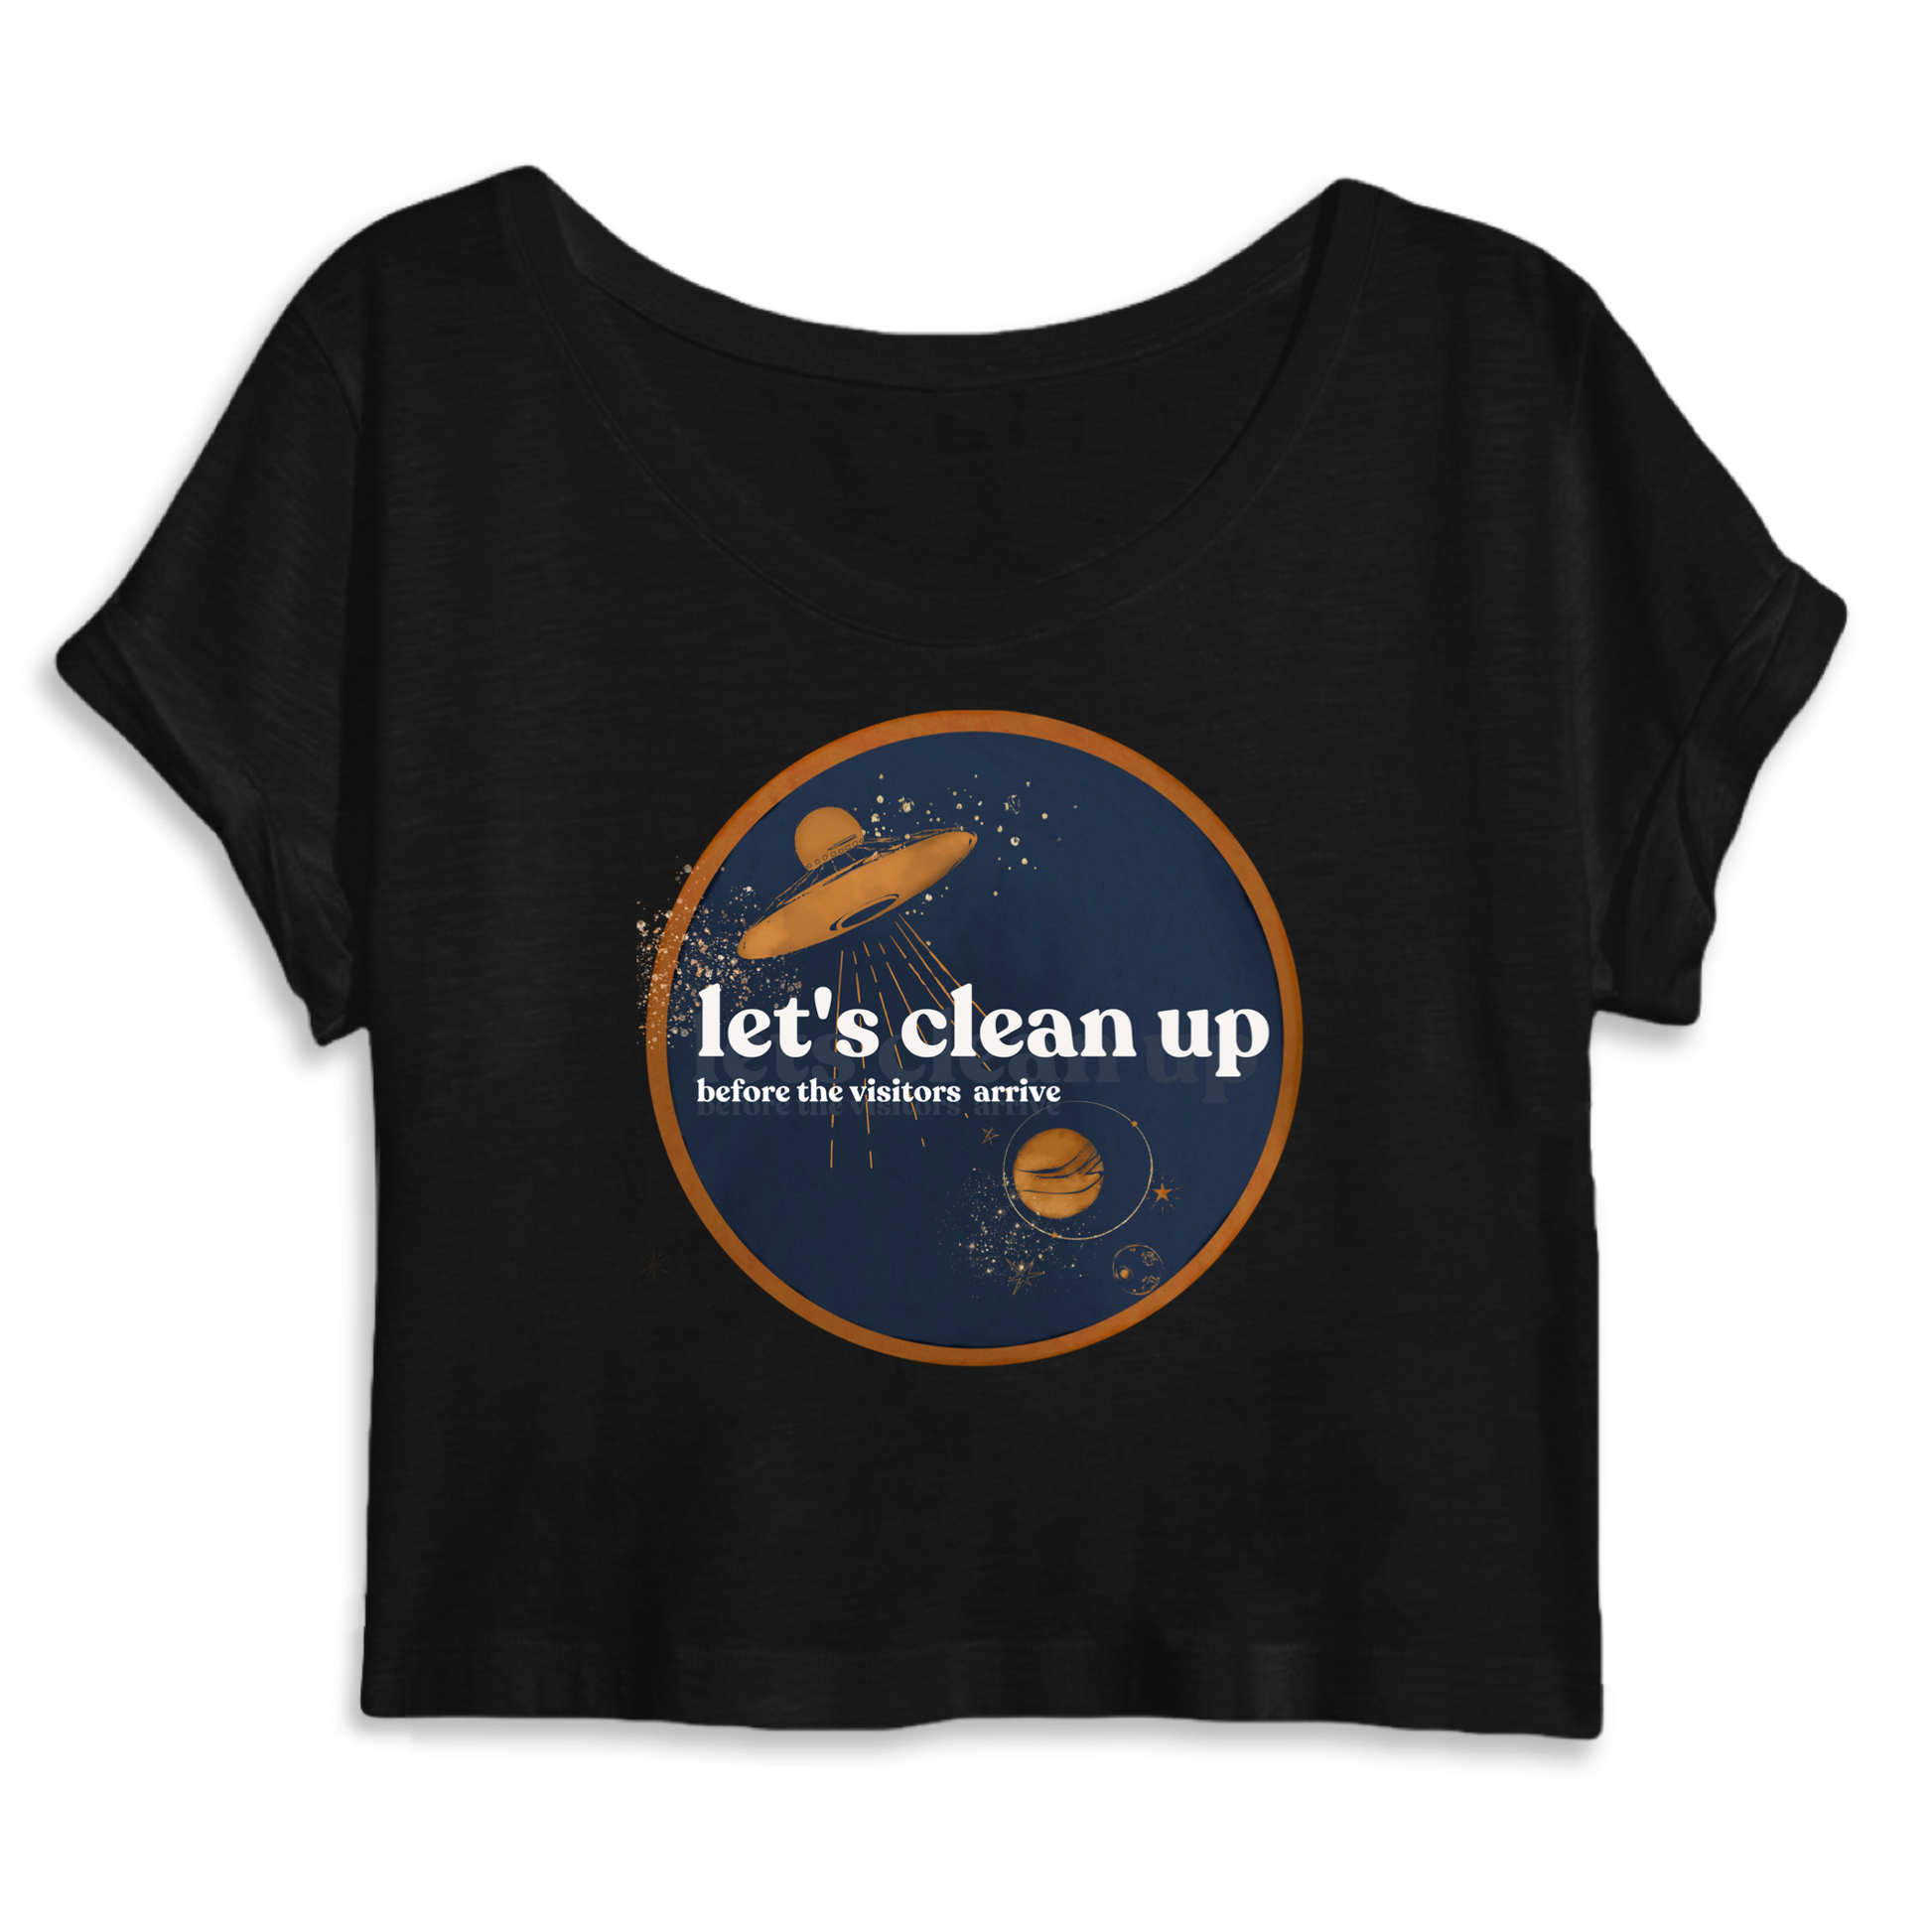 BlackLets clean up, Tees Organic cotton clothes for women, Organic Cotton Clothing for Women, Organic Cotton Tank Tops, Cotton Organic T Shirts, Organic Cotton T Shirt, Band Tees, Vintage Tees, Rolling Stones Bomber Jacket, Stoned Girls, She's a rainbow, Environmental Slogan Tshirt, Sustainable Fashion Ideas, Sustainable Fashion Dresses, What is sustainability in fashion, Teen sustainable fashion and ethical brands, Sustainable Fashion Course, made to order clothing, made to order shirts,